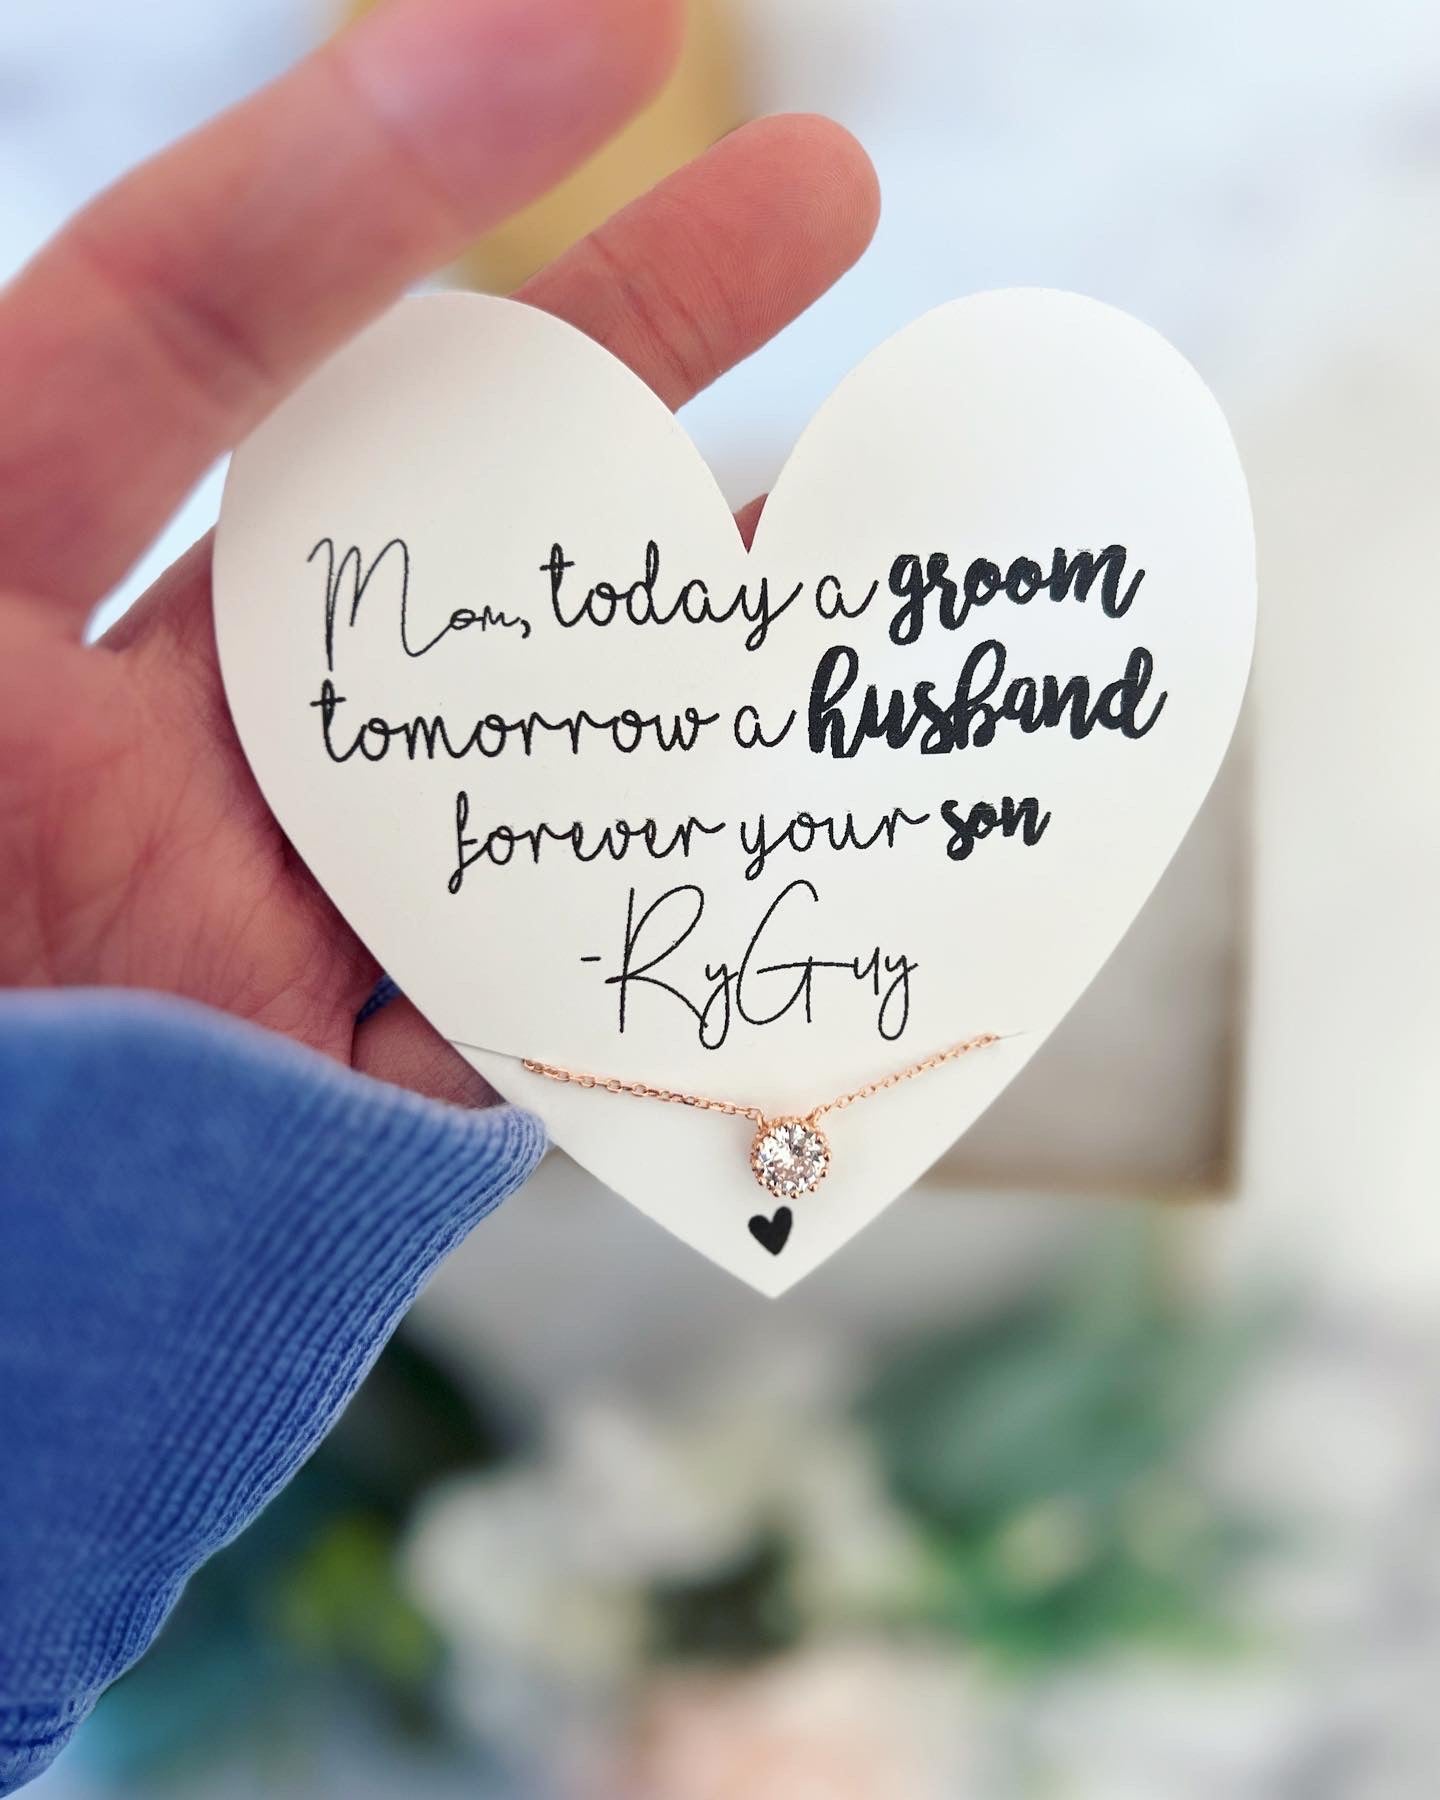 Today a Groom, Mother of the Groom gift!